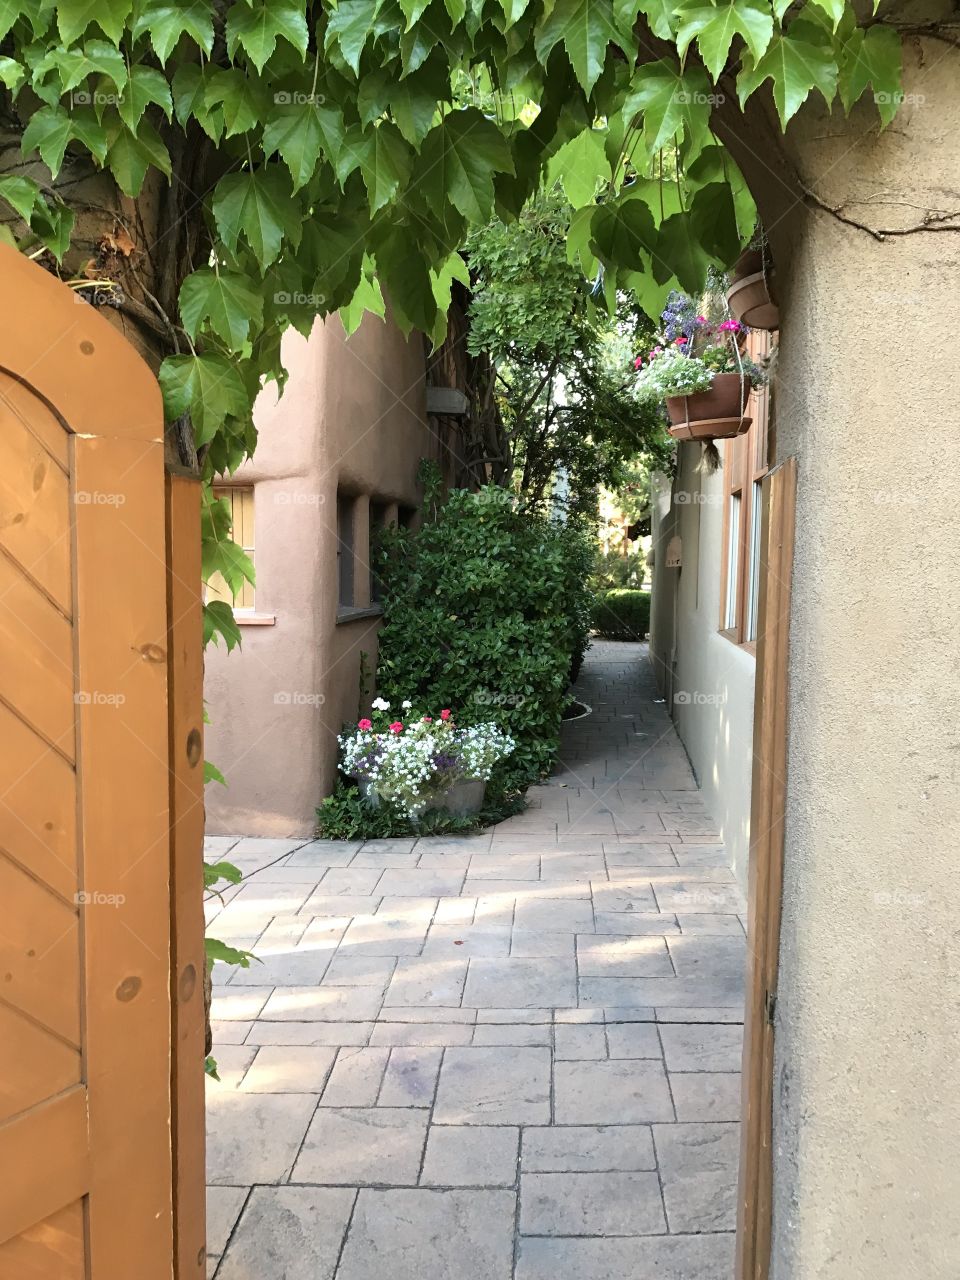 View through doorway to courtyard in Santa Fe, New Mexico, with traditional adobe architecture